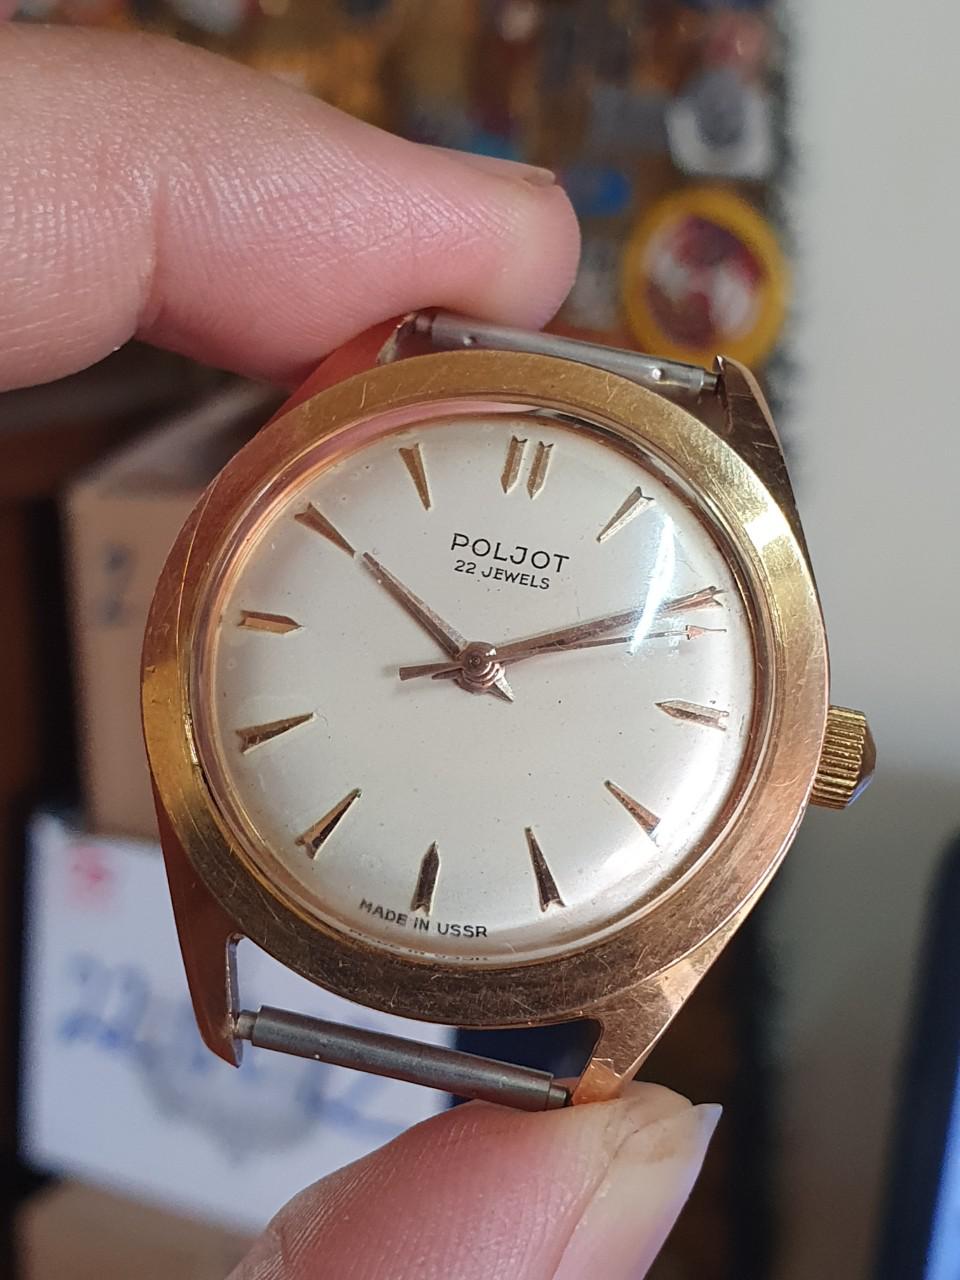 Đồng hồ Poljot 22 jewels made in ussr antishock automatic foreign